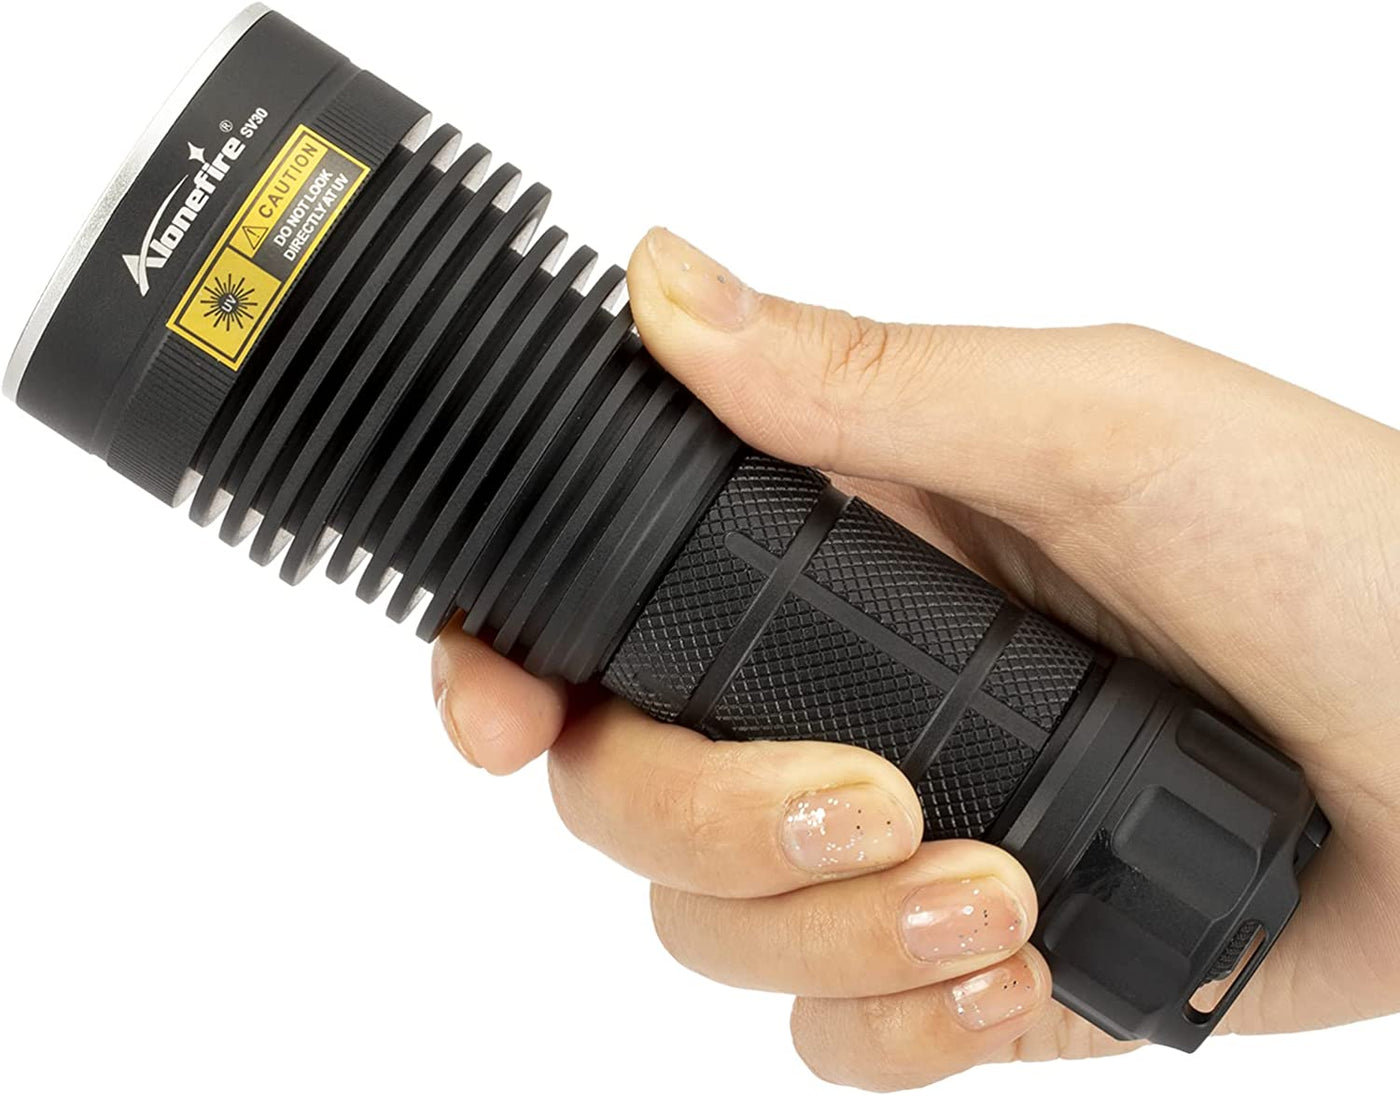 Professional UV Flashlight with rechargeable battery.